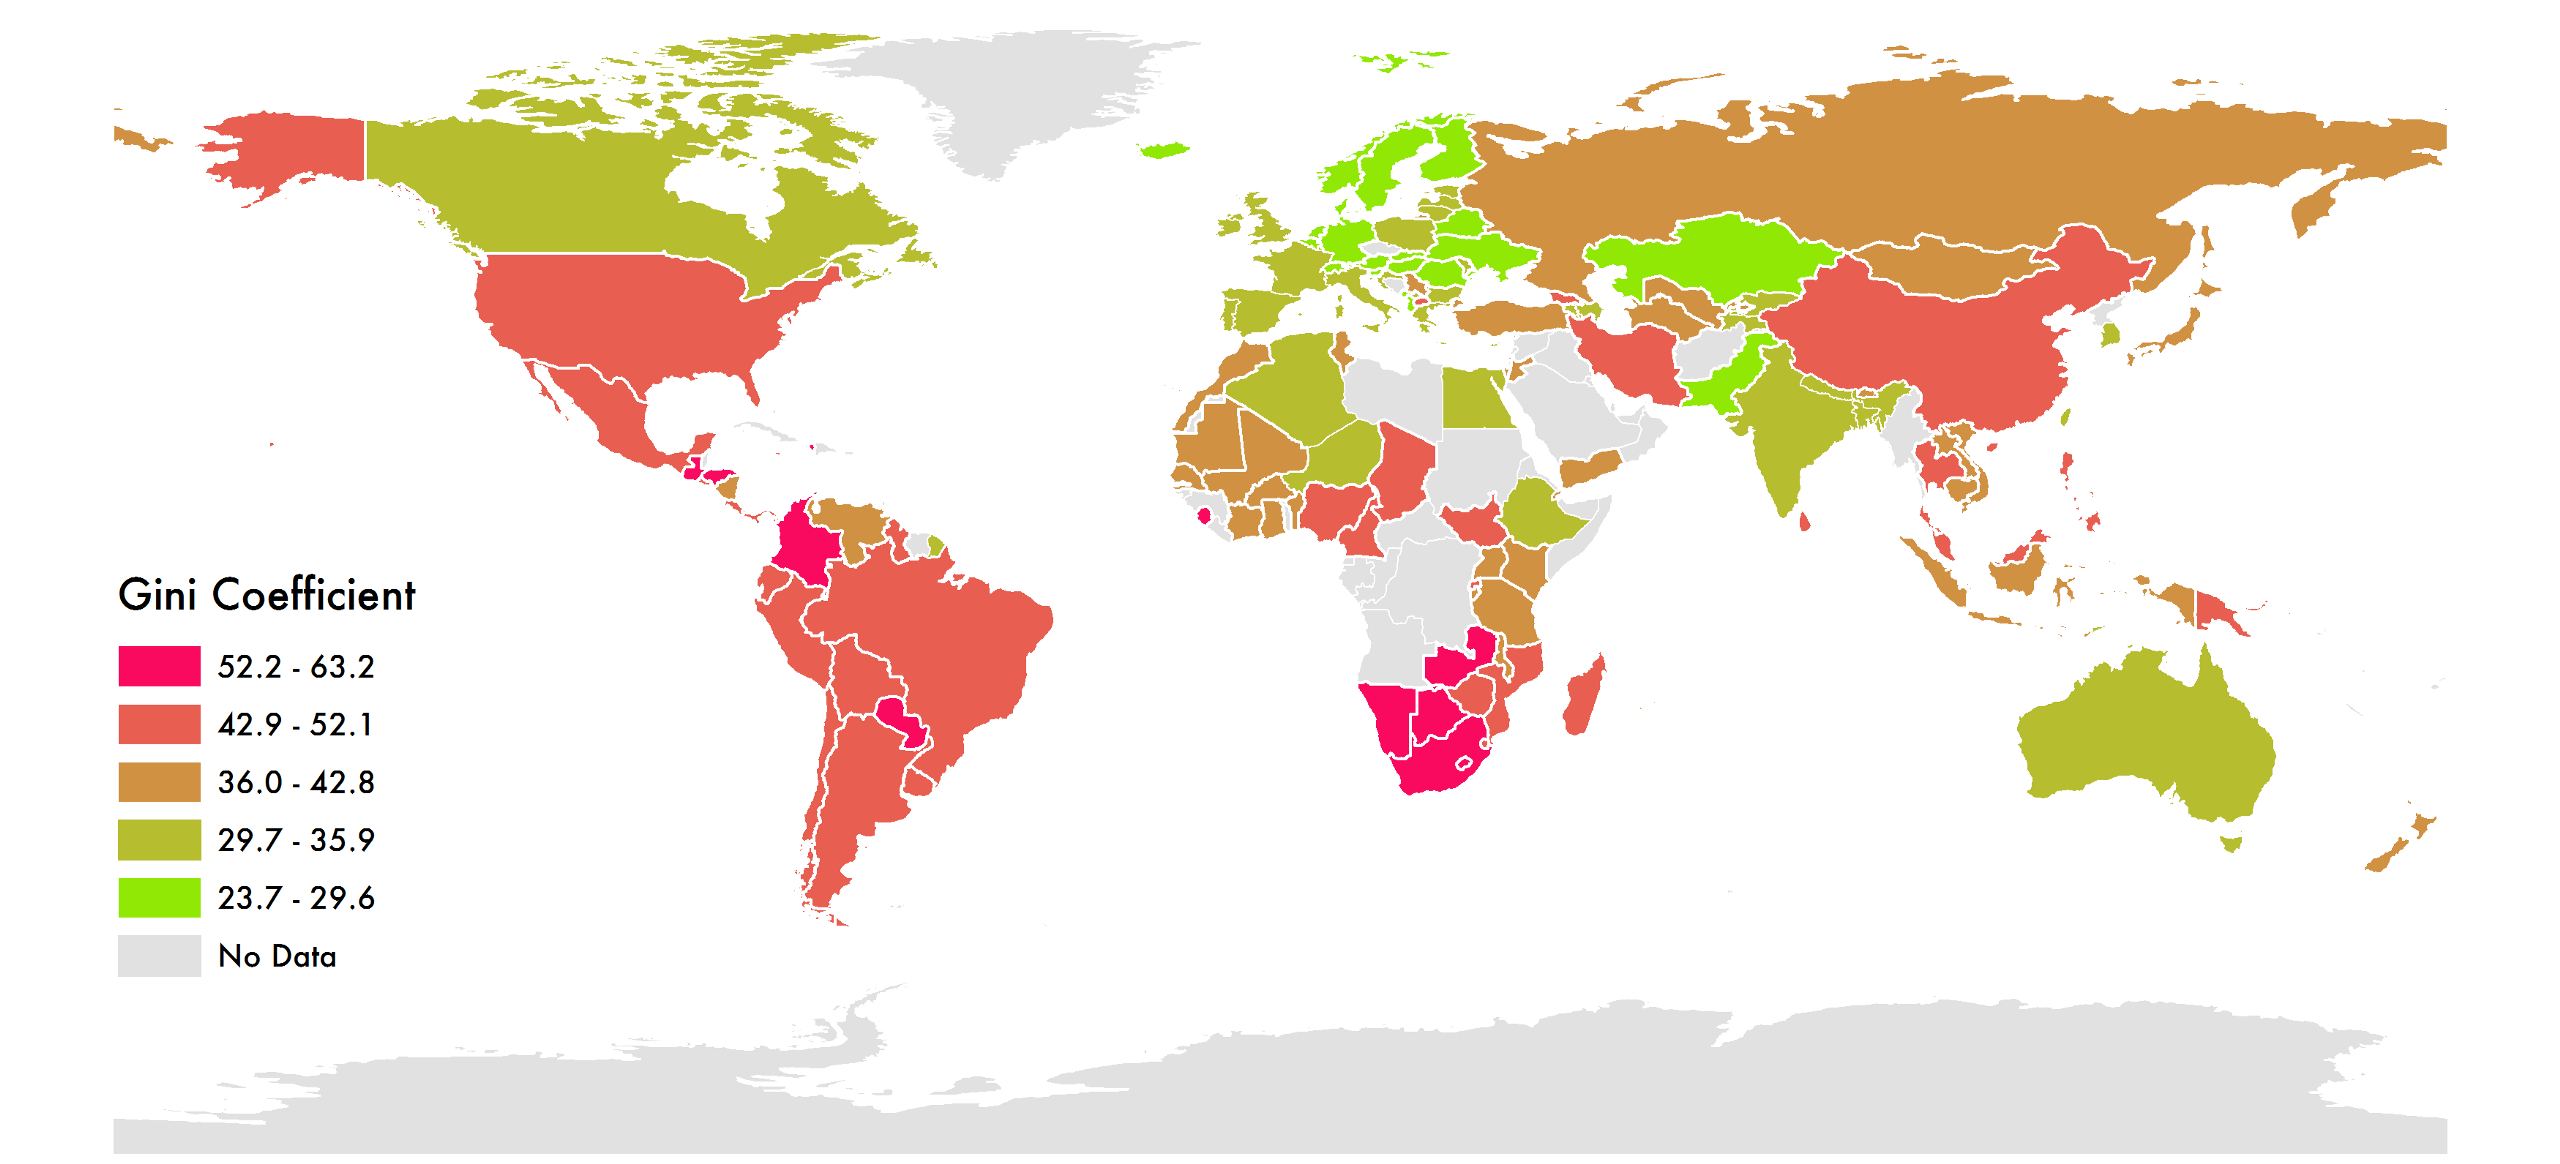 A map color-coded by Gini coefficient. The lowest values are in Northern/Eastern Europe and Central Asia.